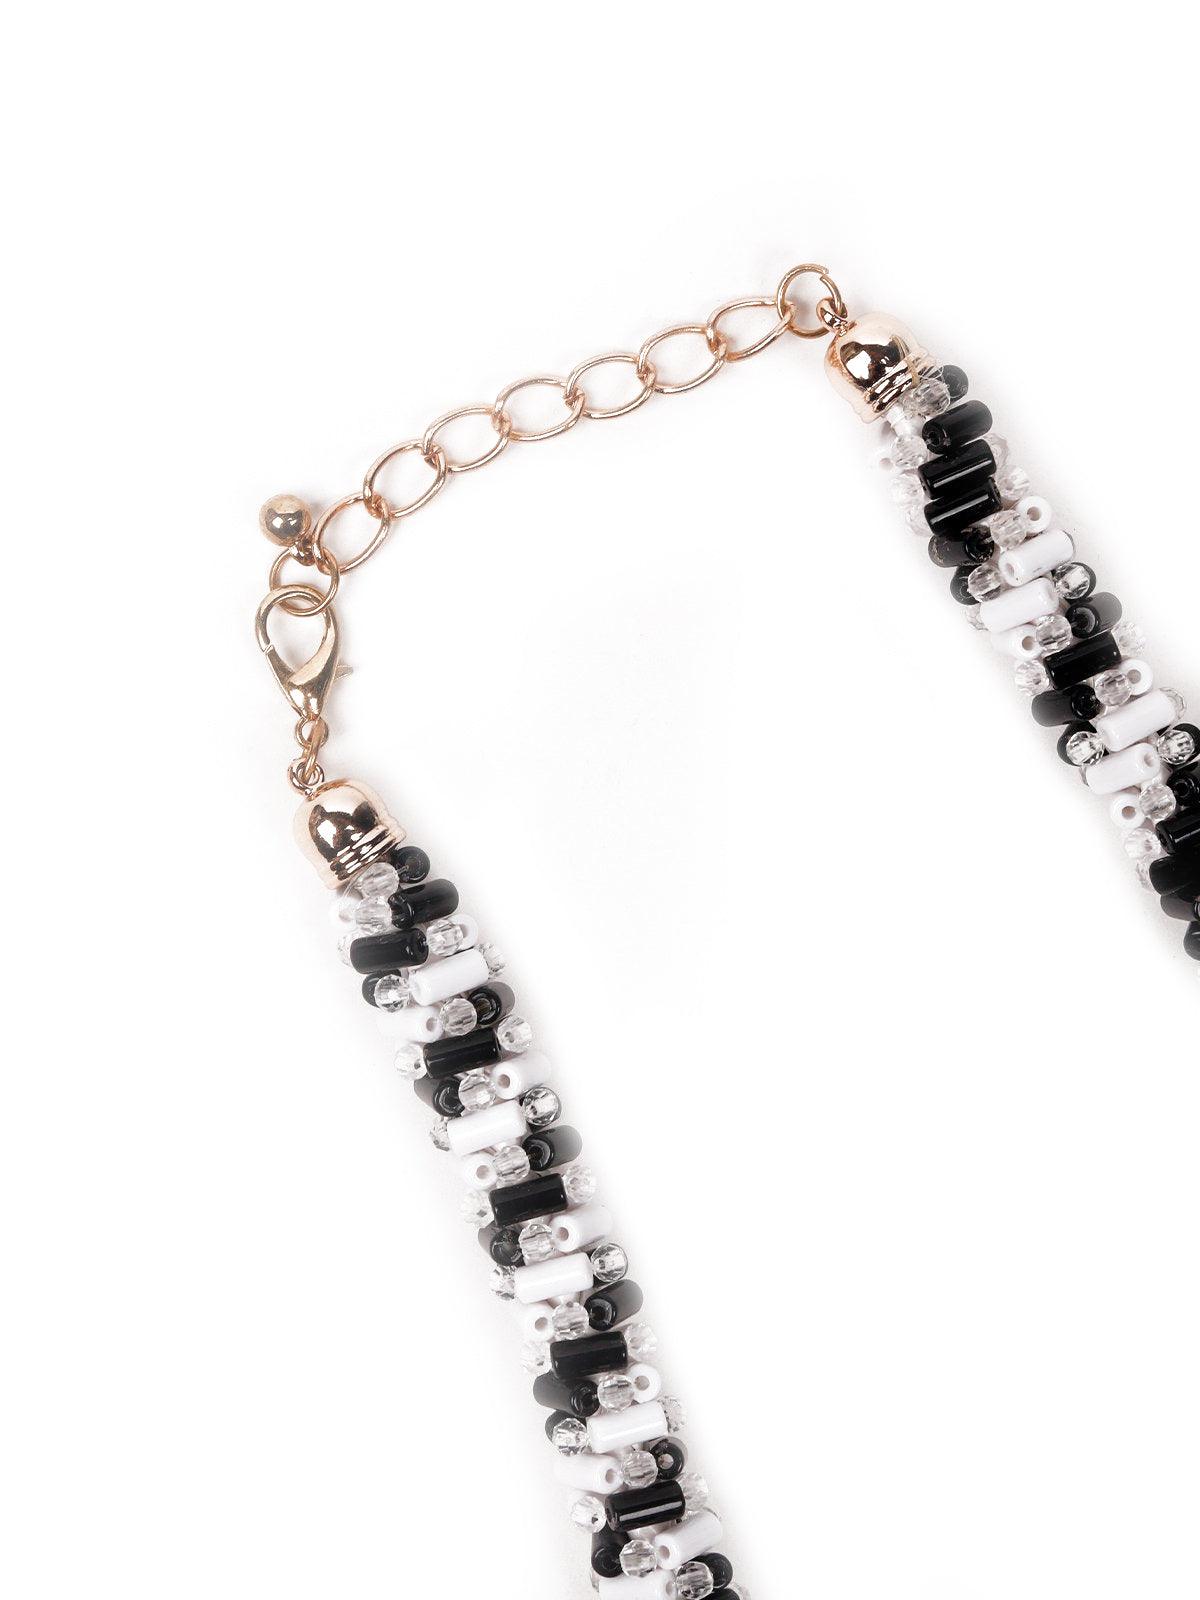 Black And White Beaded Necklace - Odette